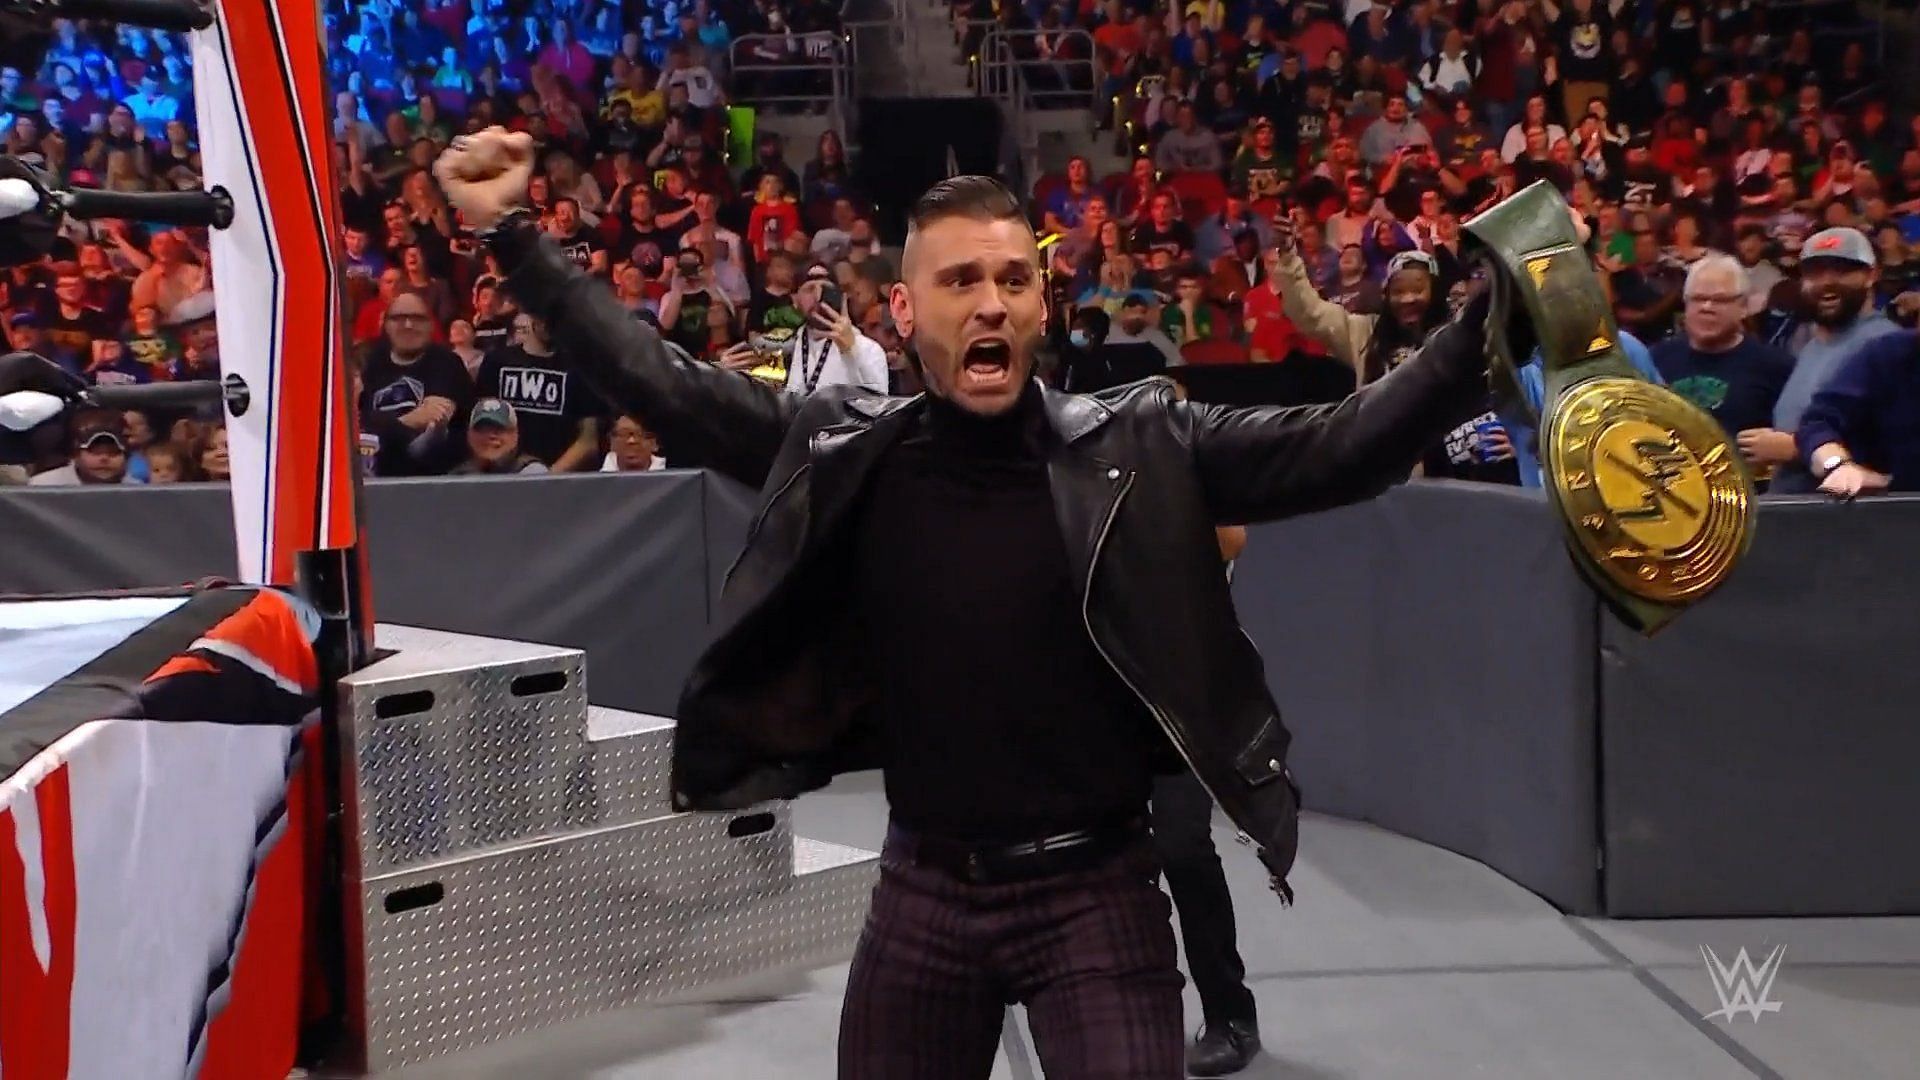 WWE announcer Corey Graves references legendary metal band on WWE RAW